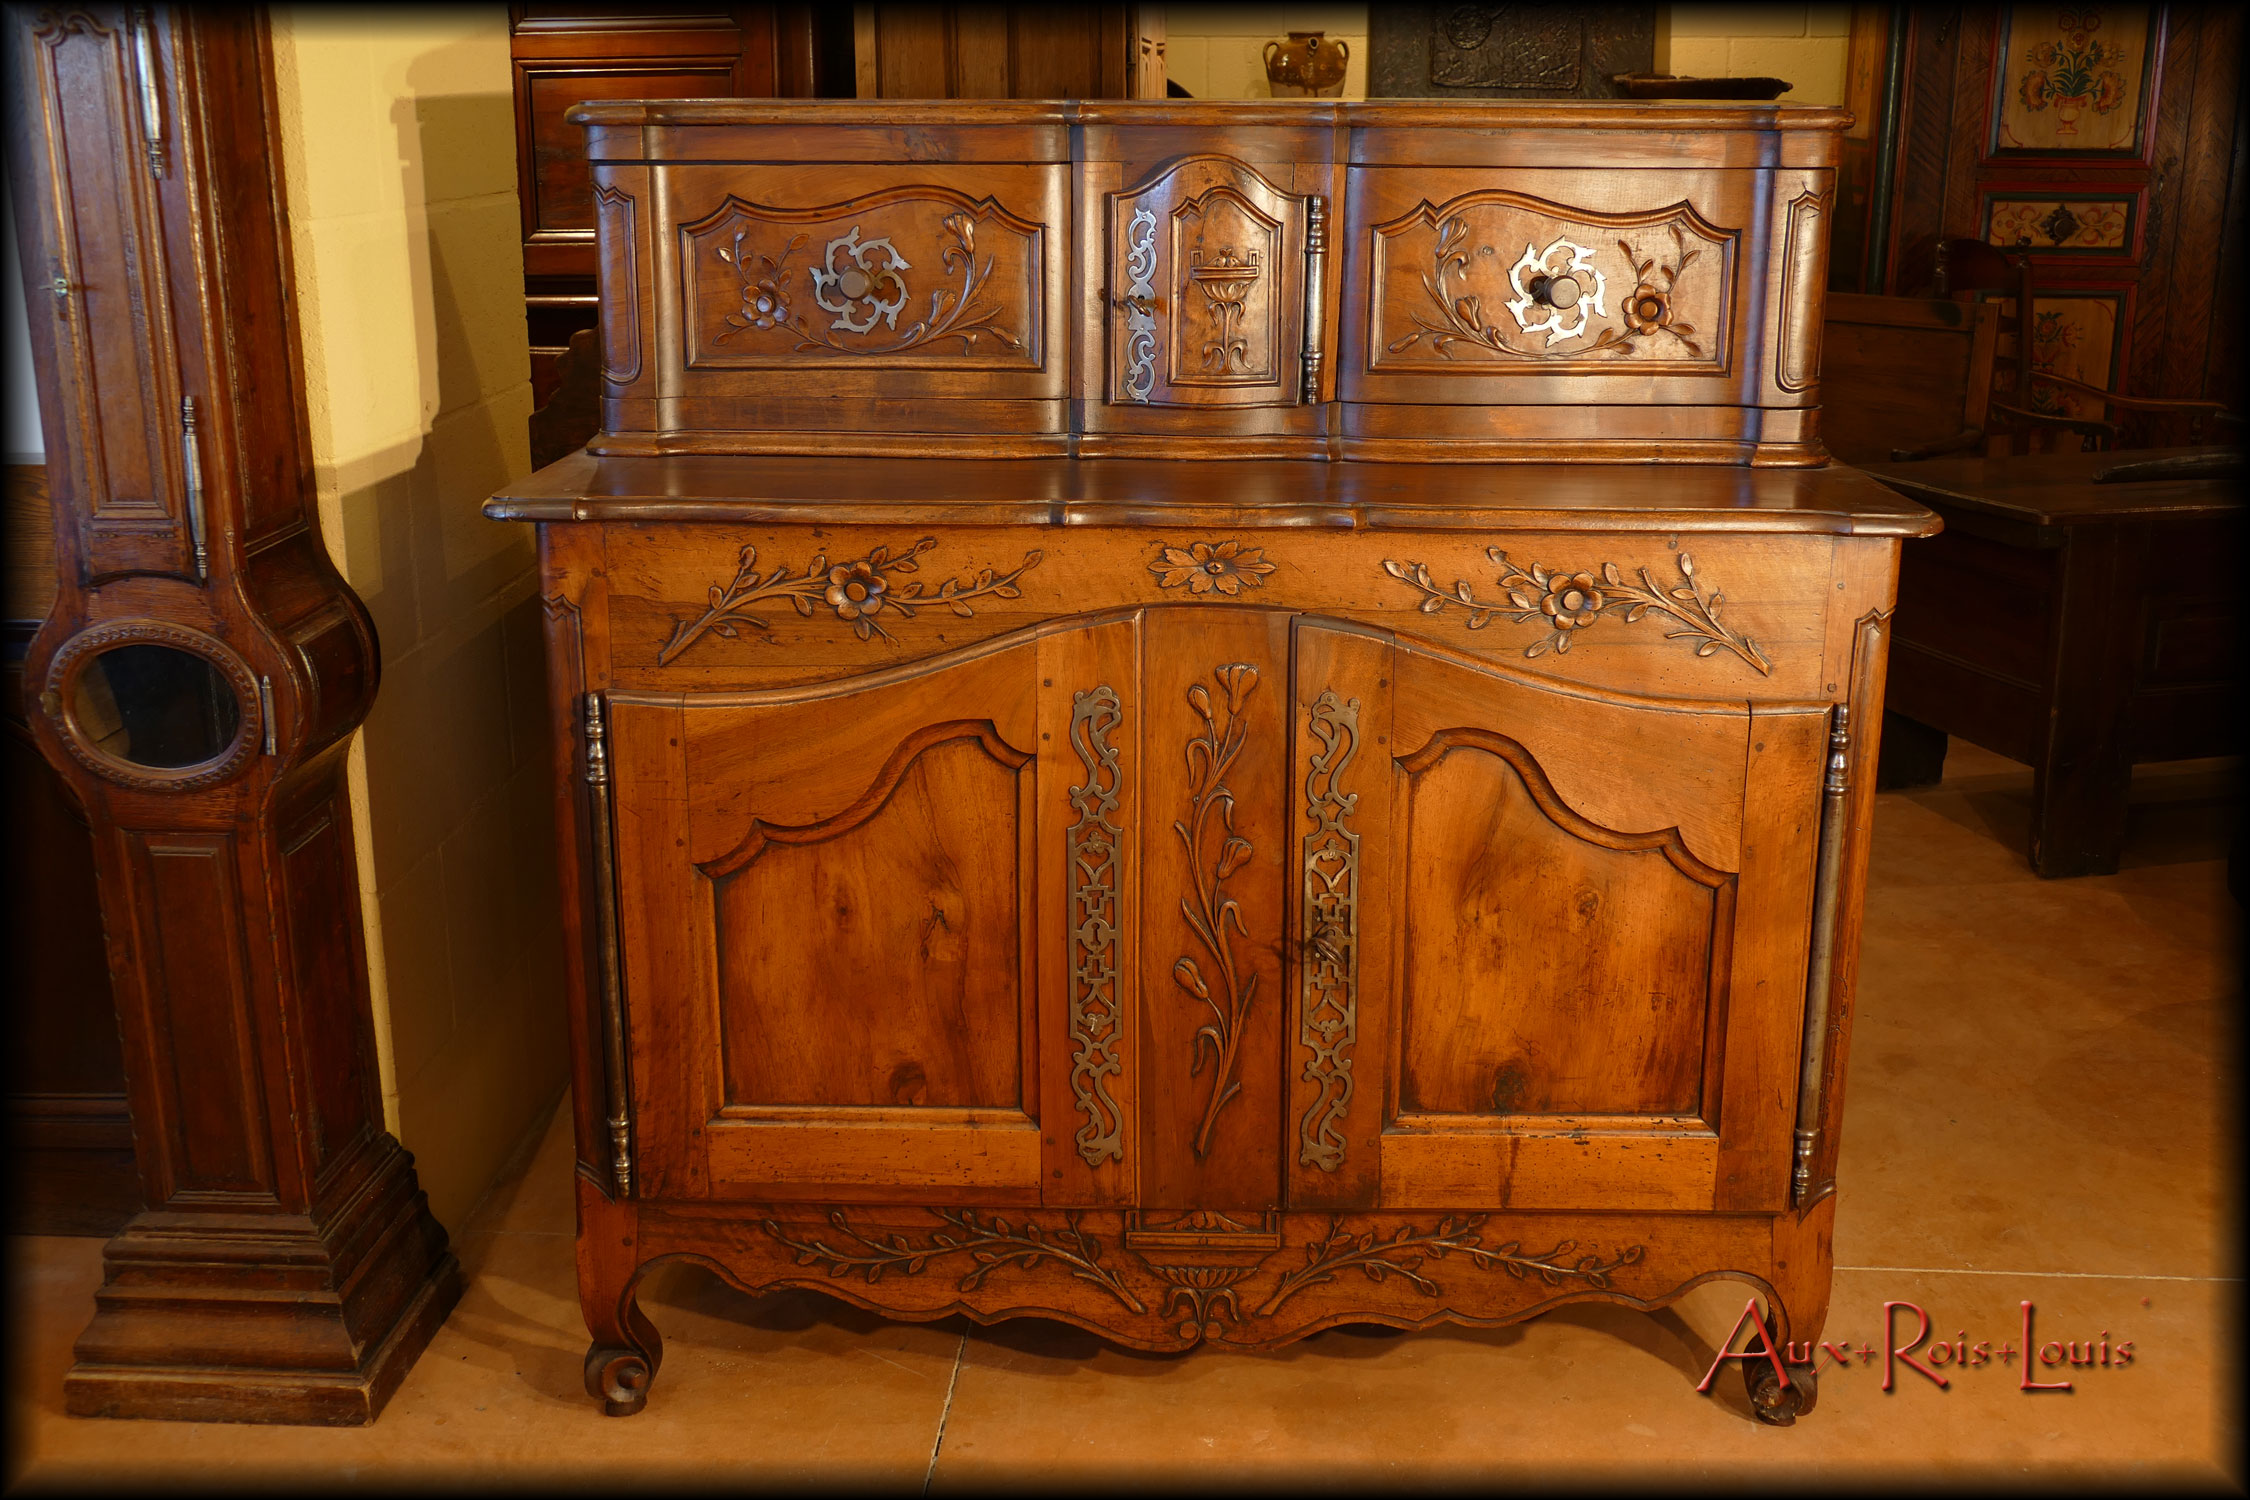 Walnut sideboard with tabernacle – 19ᵗʰ century – Provence